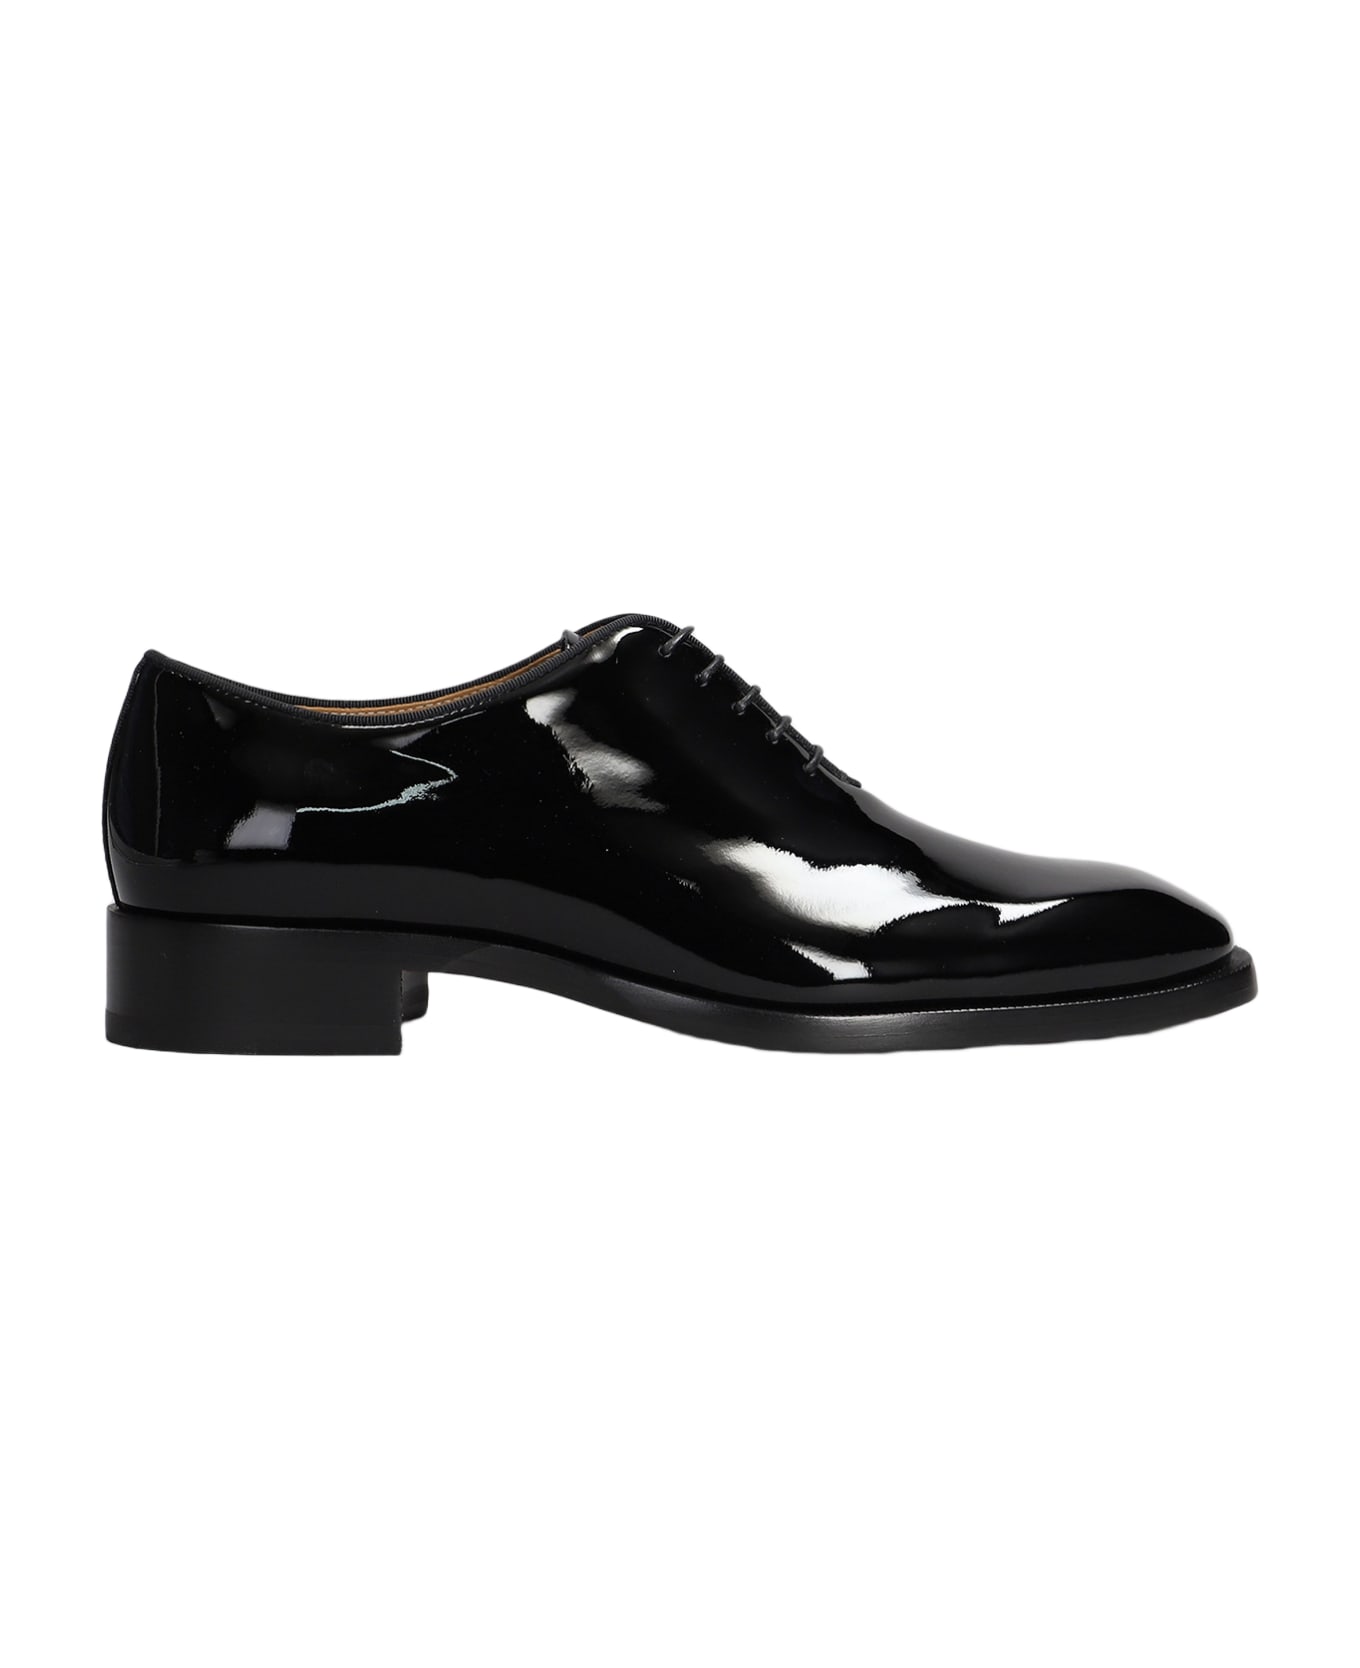 Christian Louboutin Corteo Lace Up Shoes In Black Patent Leather - black